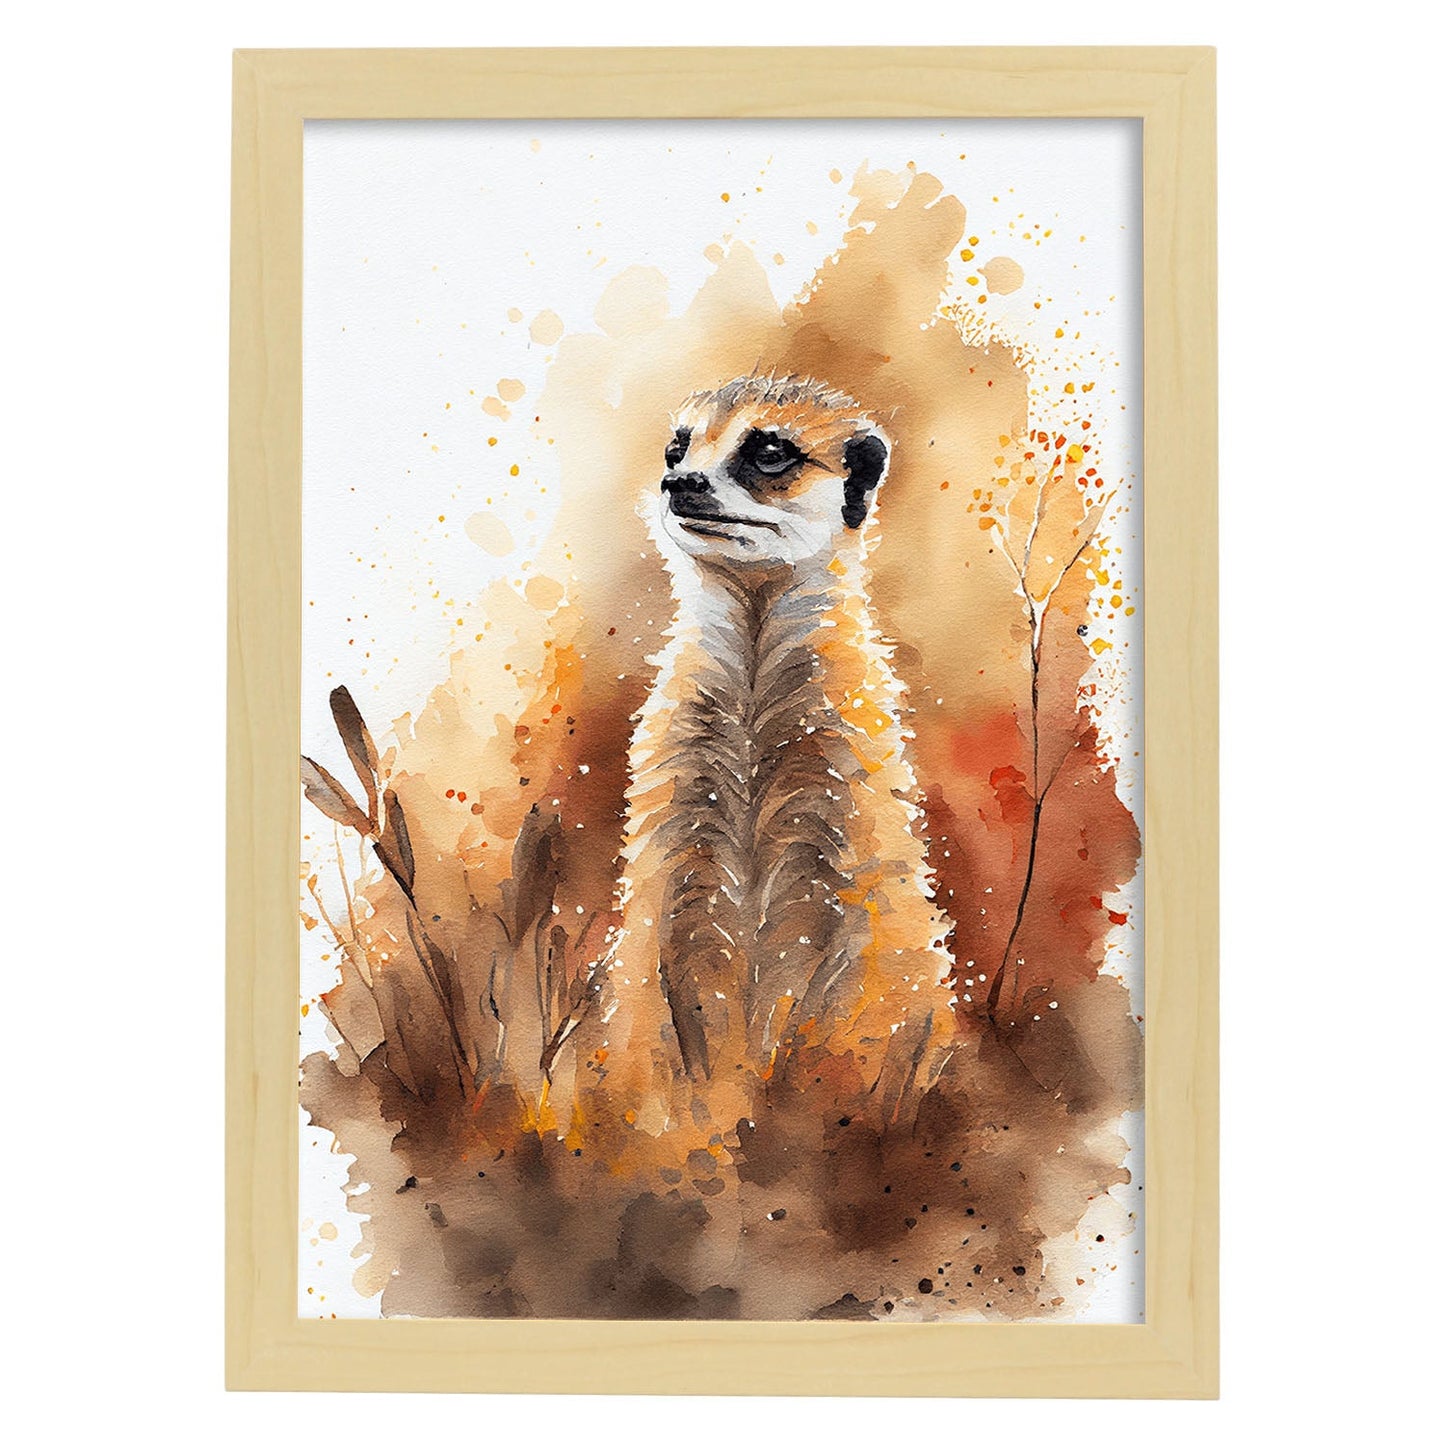 Nacnic Watercolor of Meerkat in the forest. Aesthetic Wall Art Prints for Bedroom or Living Room Design.